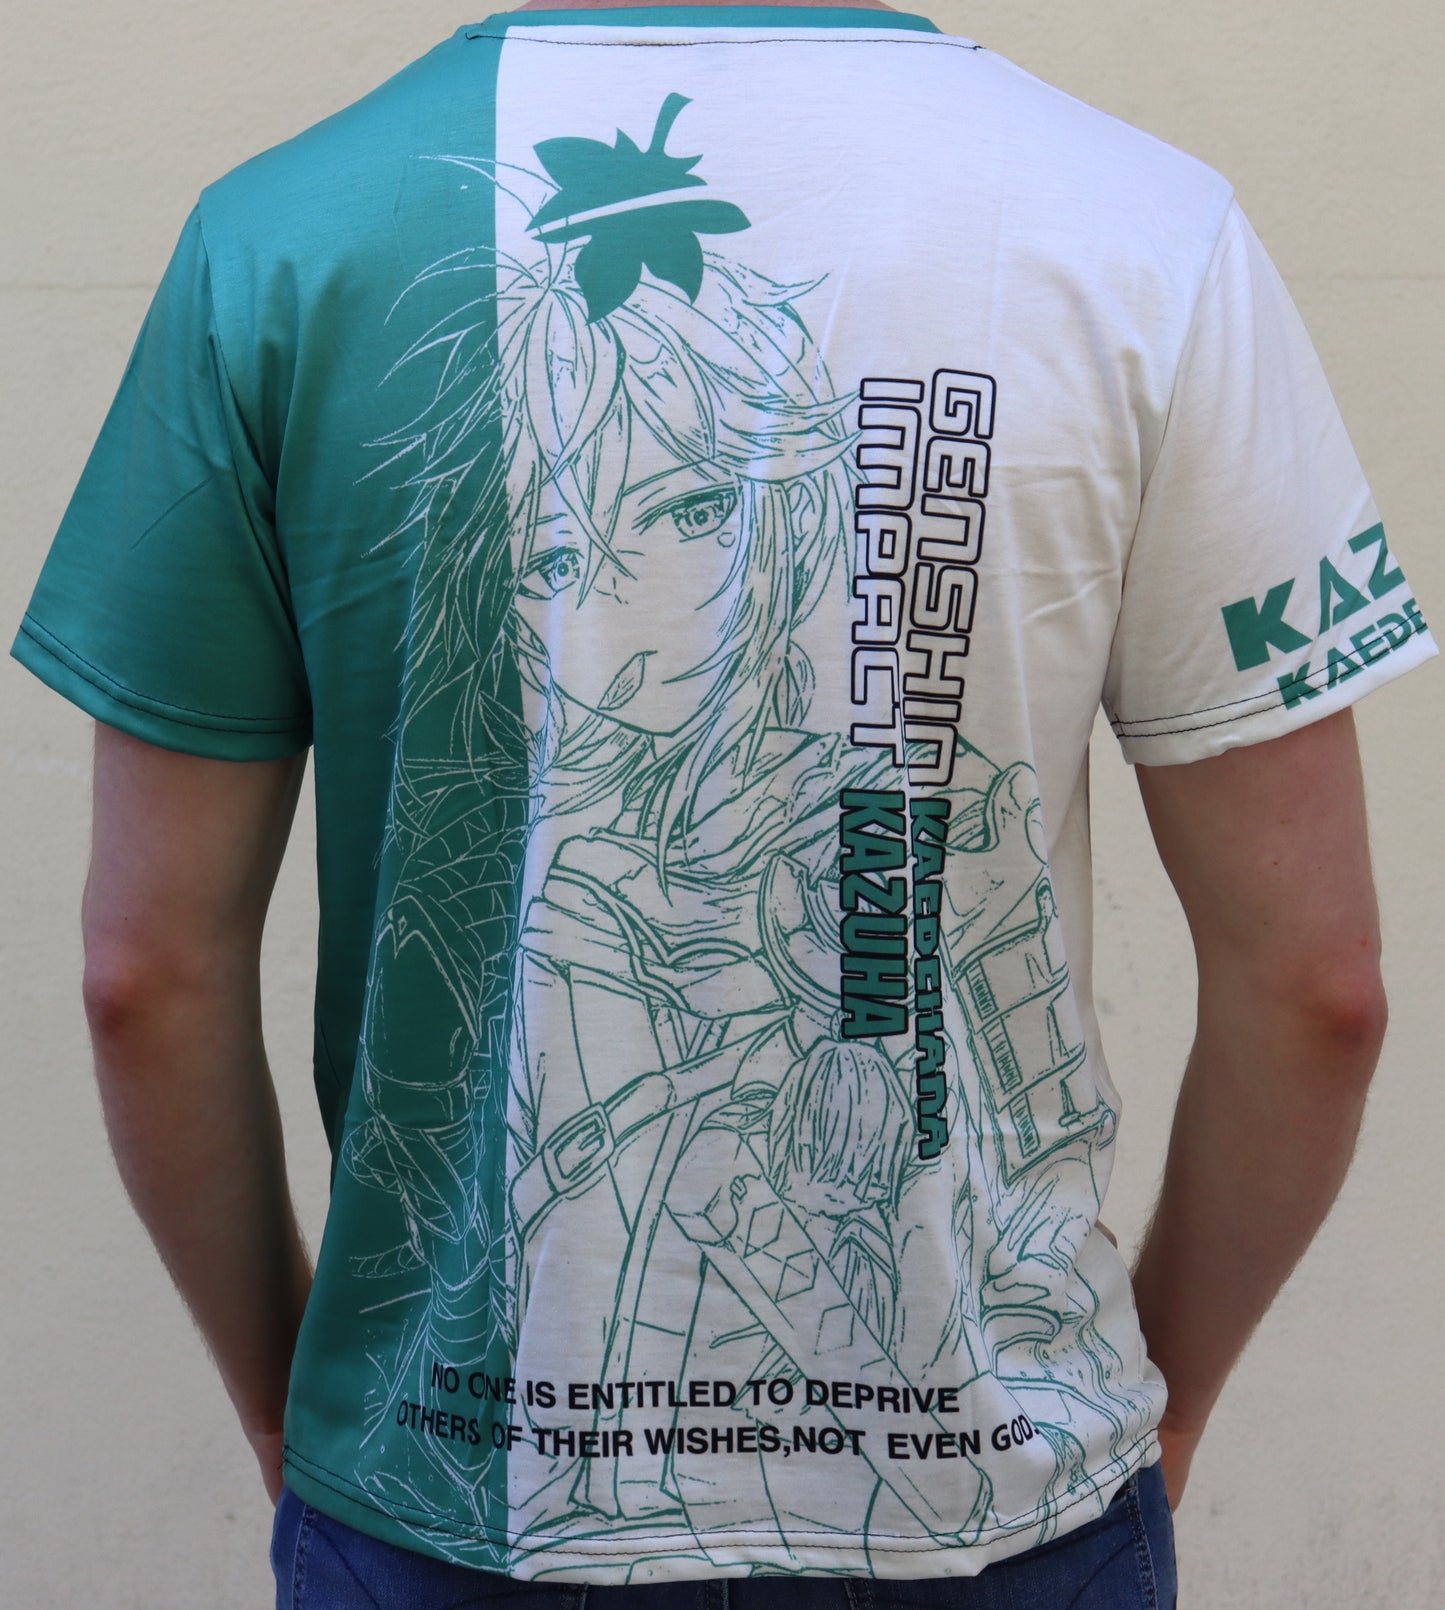 Kazuha T-Shirt(Price Does Not Include Shipping)